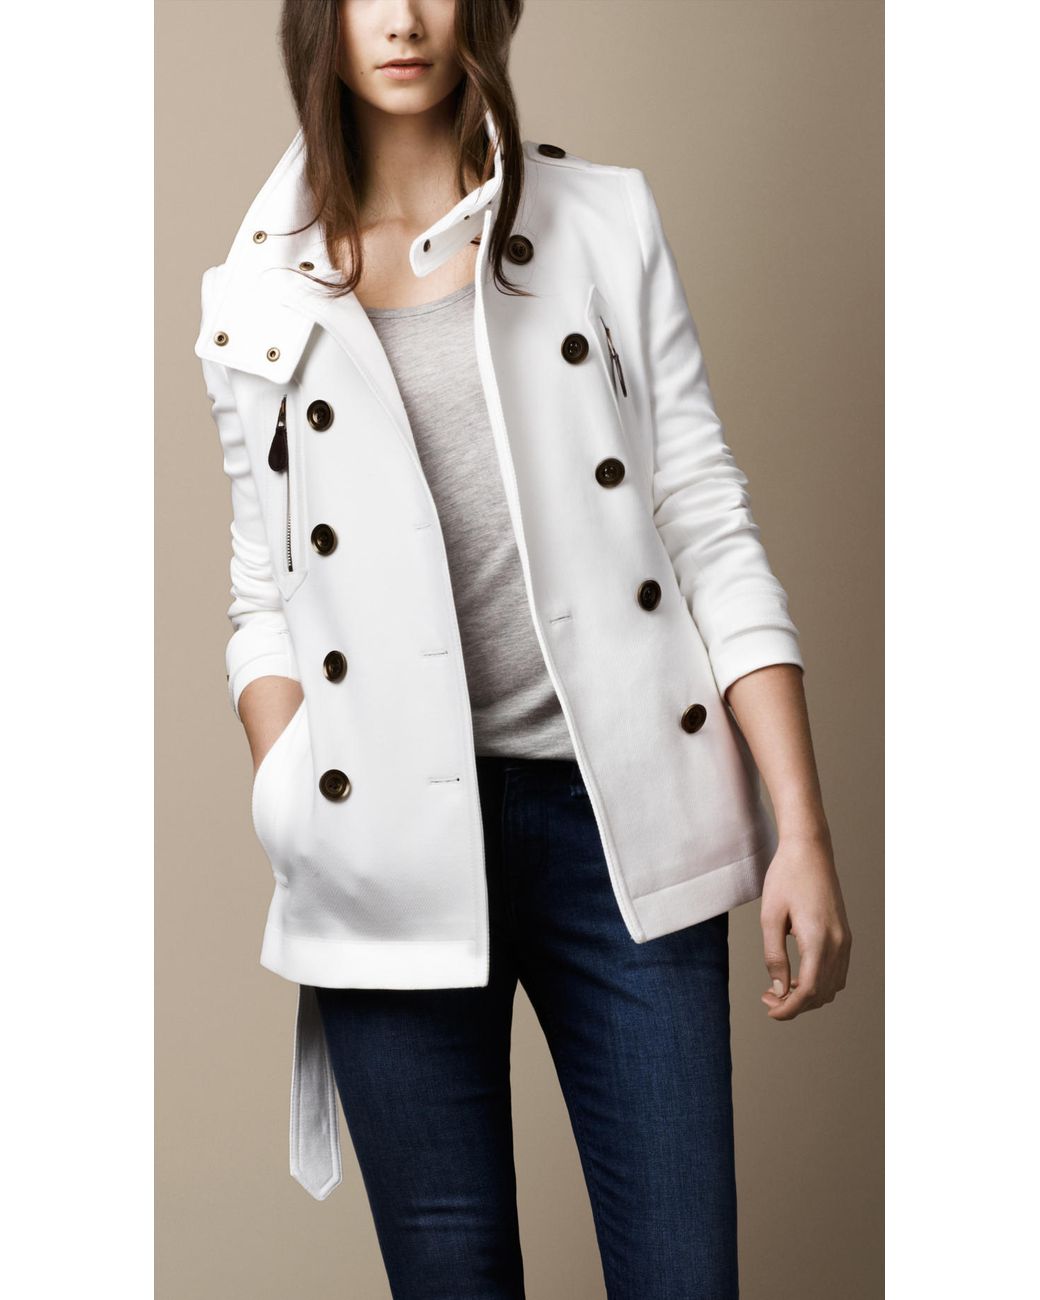 Burberry Brit Short Funnel Collar Trench Coat in White | Lyst